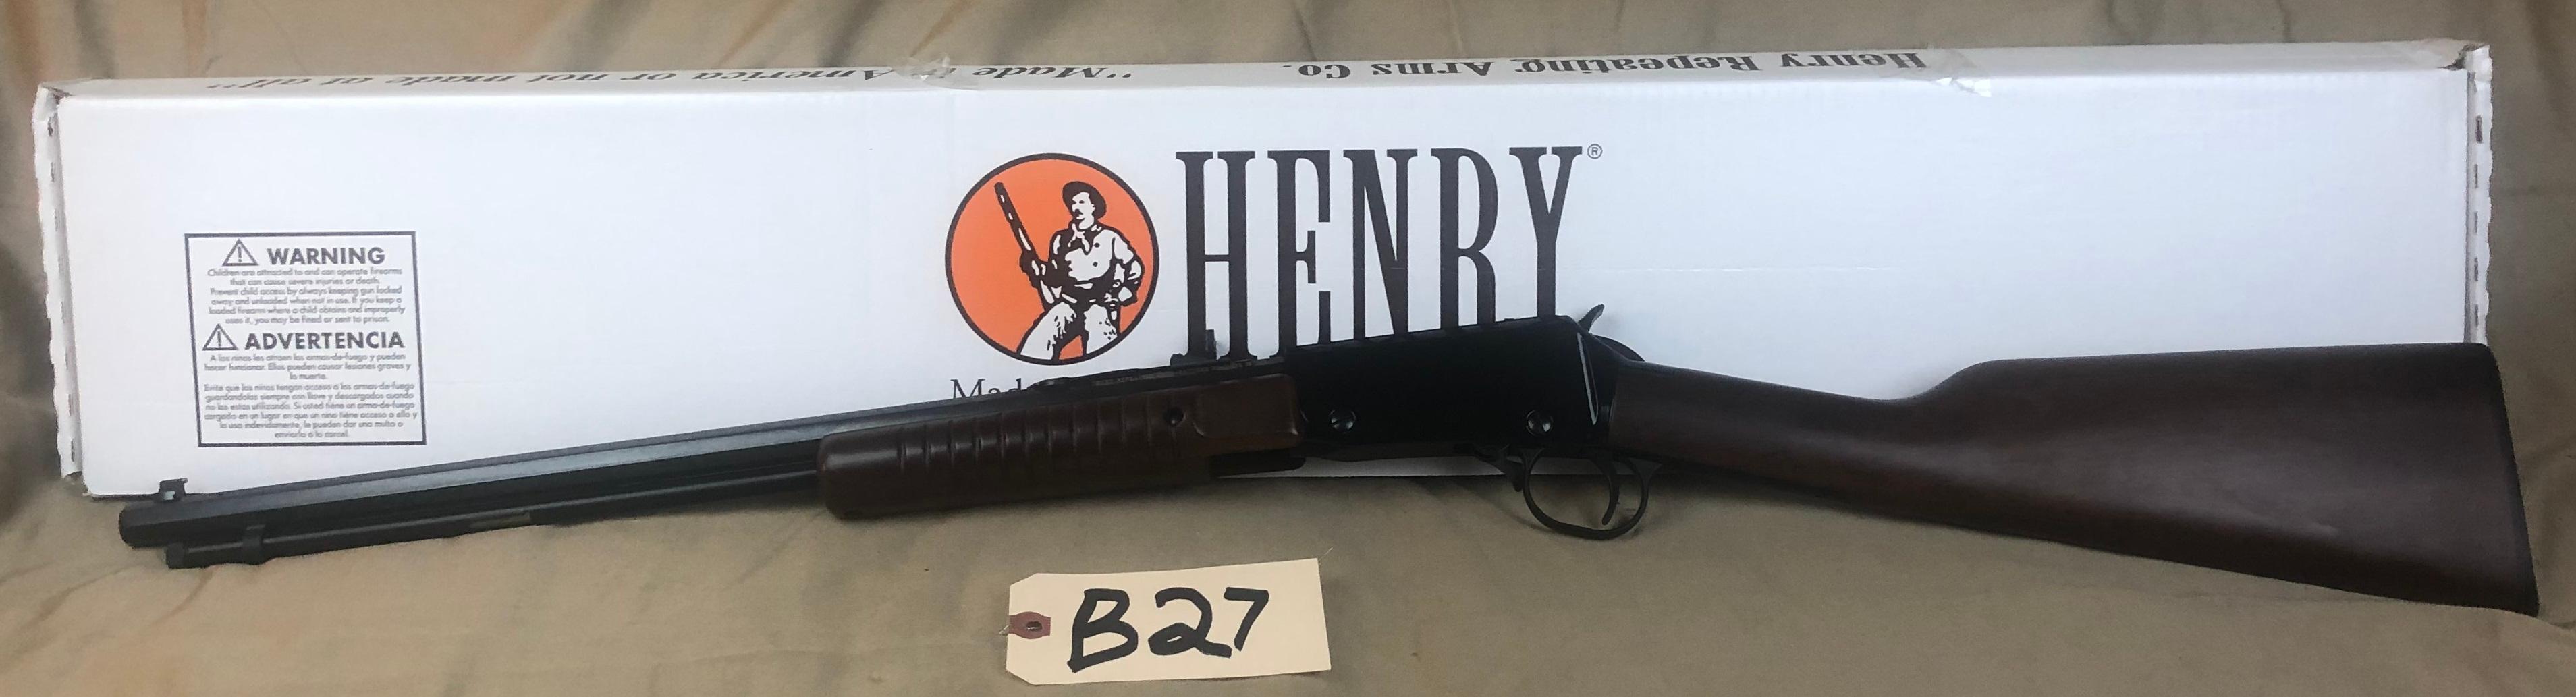 Henry, H003T Pump Action, 22